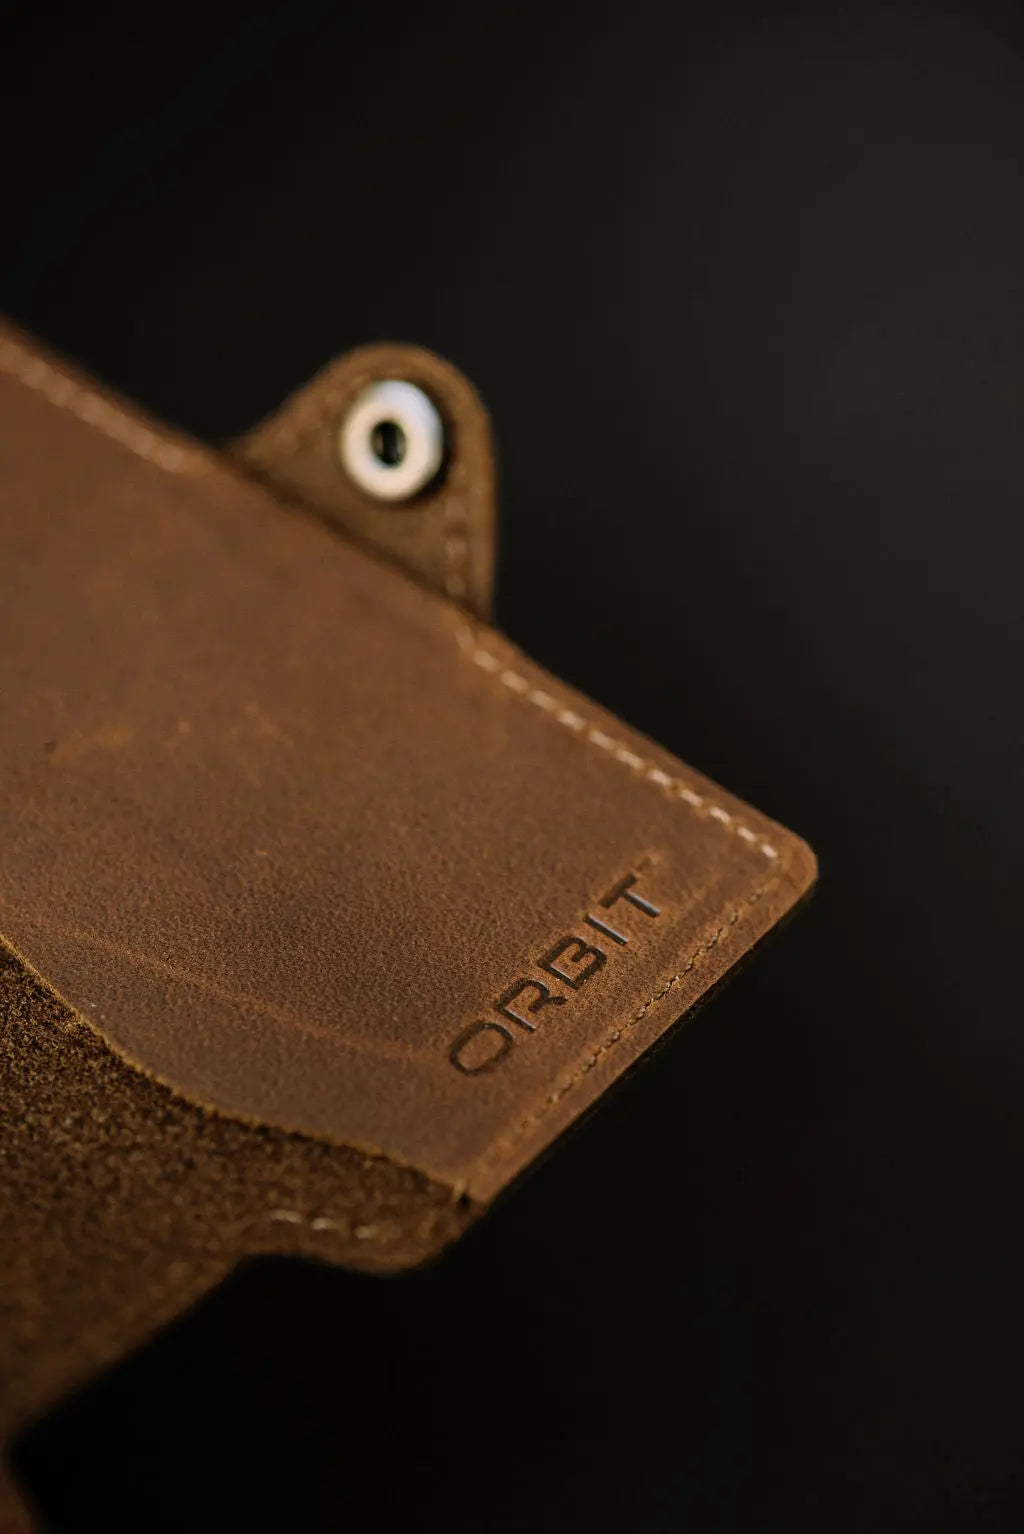 Orbit x Card - Credit card size Airtag to find your wallet